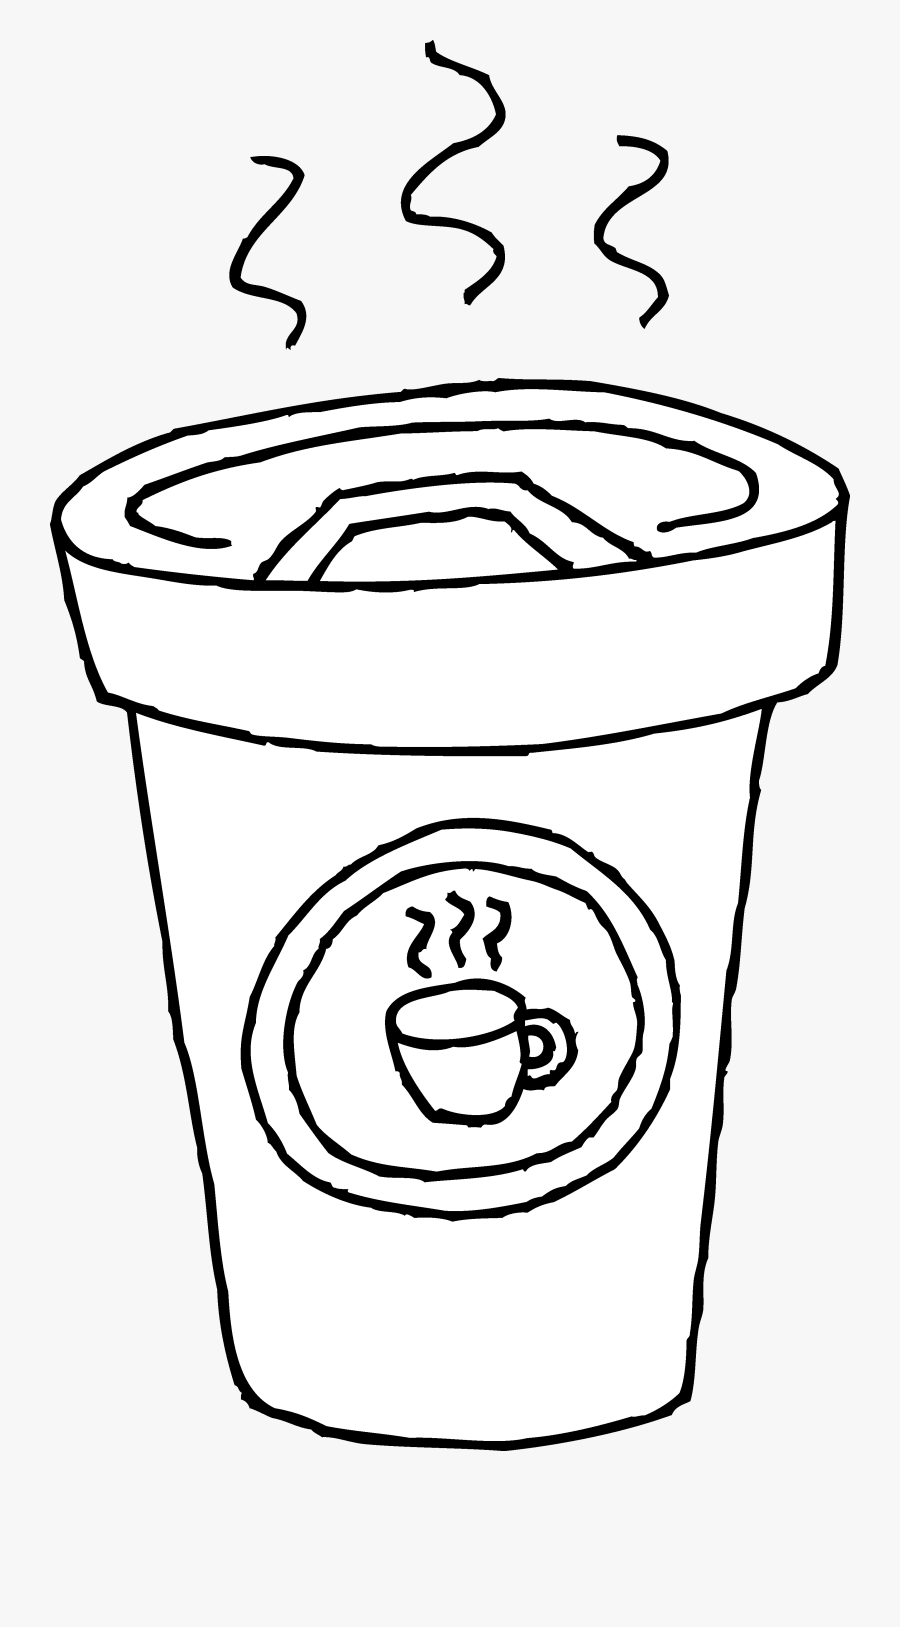 Coffee Cup Coloring Page - Clip Art Black And White Coffee, Transparent Clipart